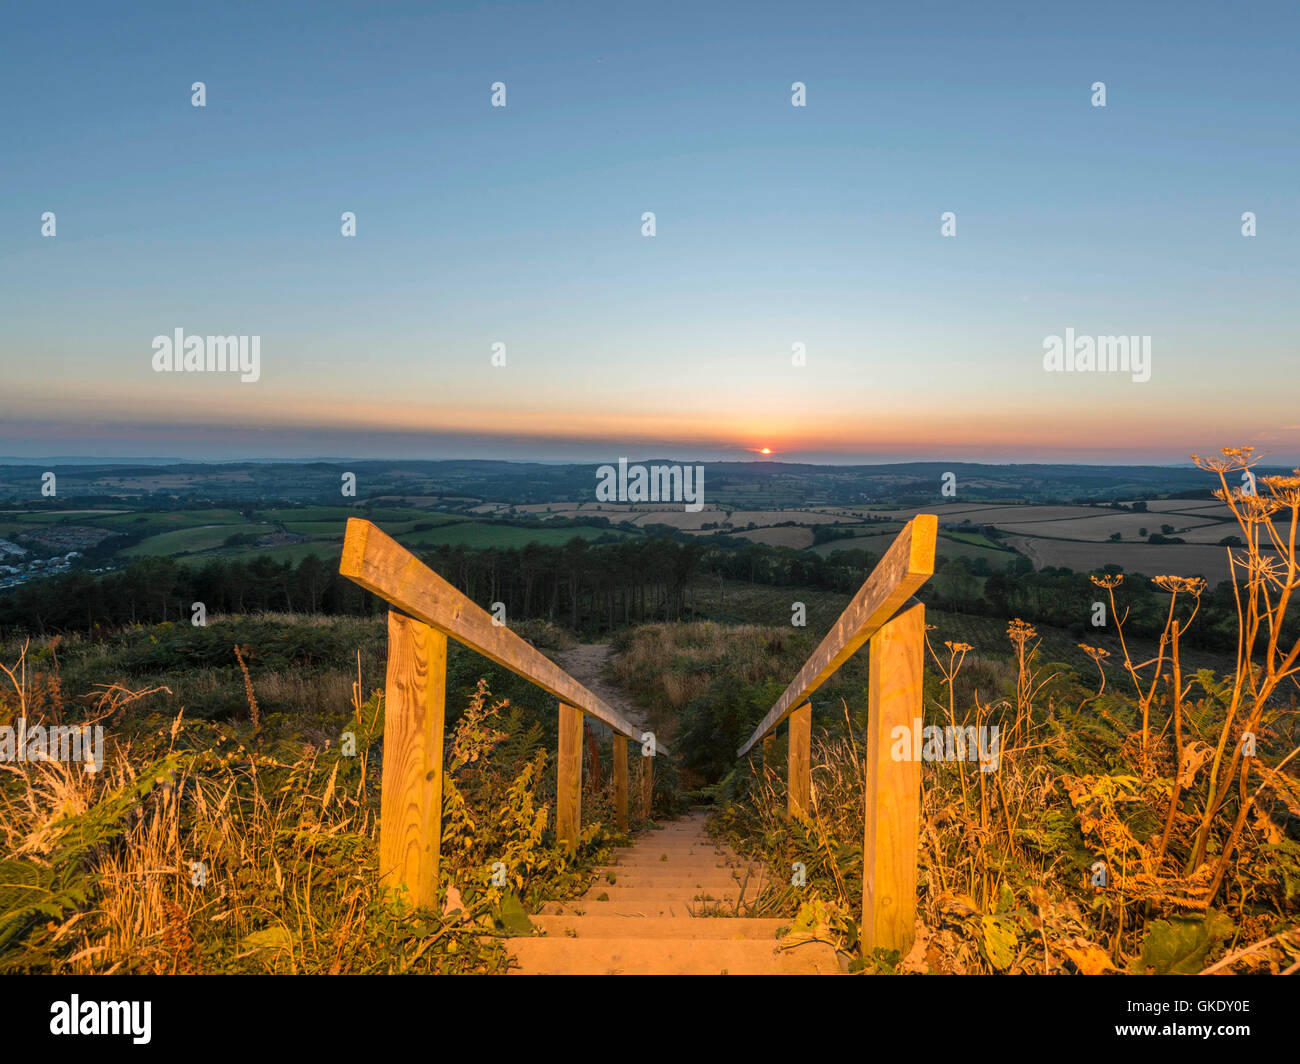 Landscape depicting the sunset over Devon countryside. Image taken at High Point wooden staircase viewing platform, Ladram Bay Stock Photo